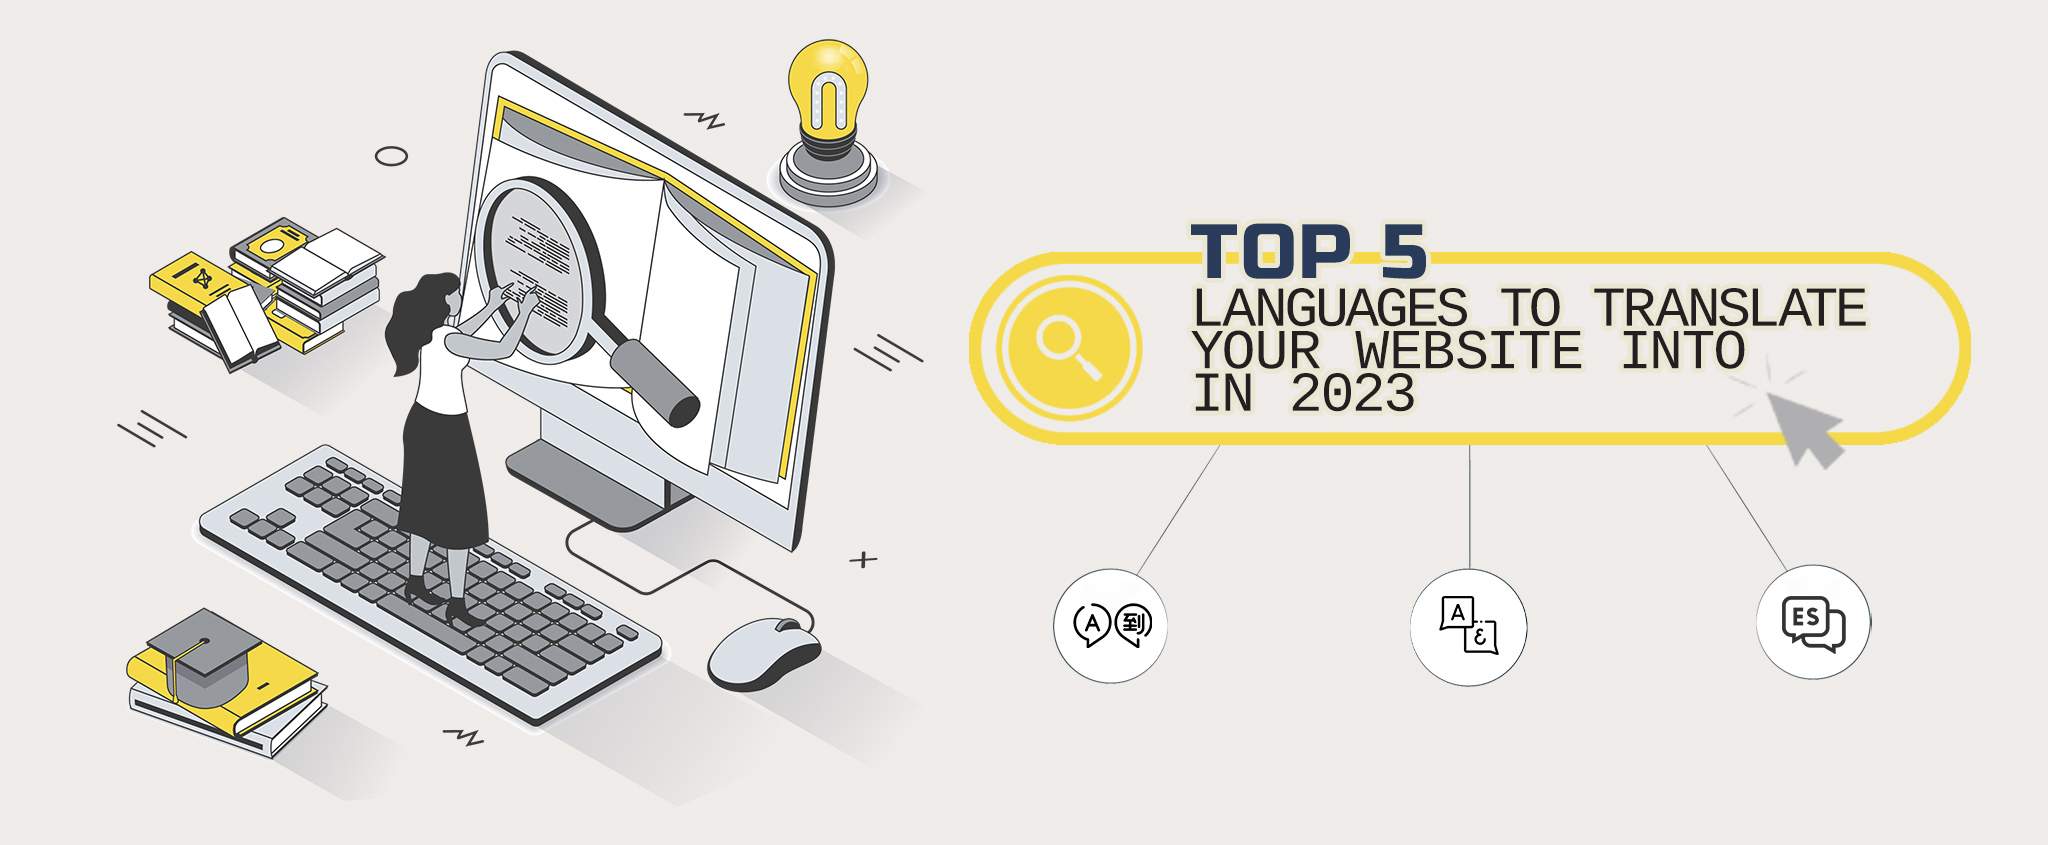 Top 5 Languages To Translate Your Website In 2023 